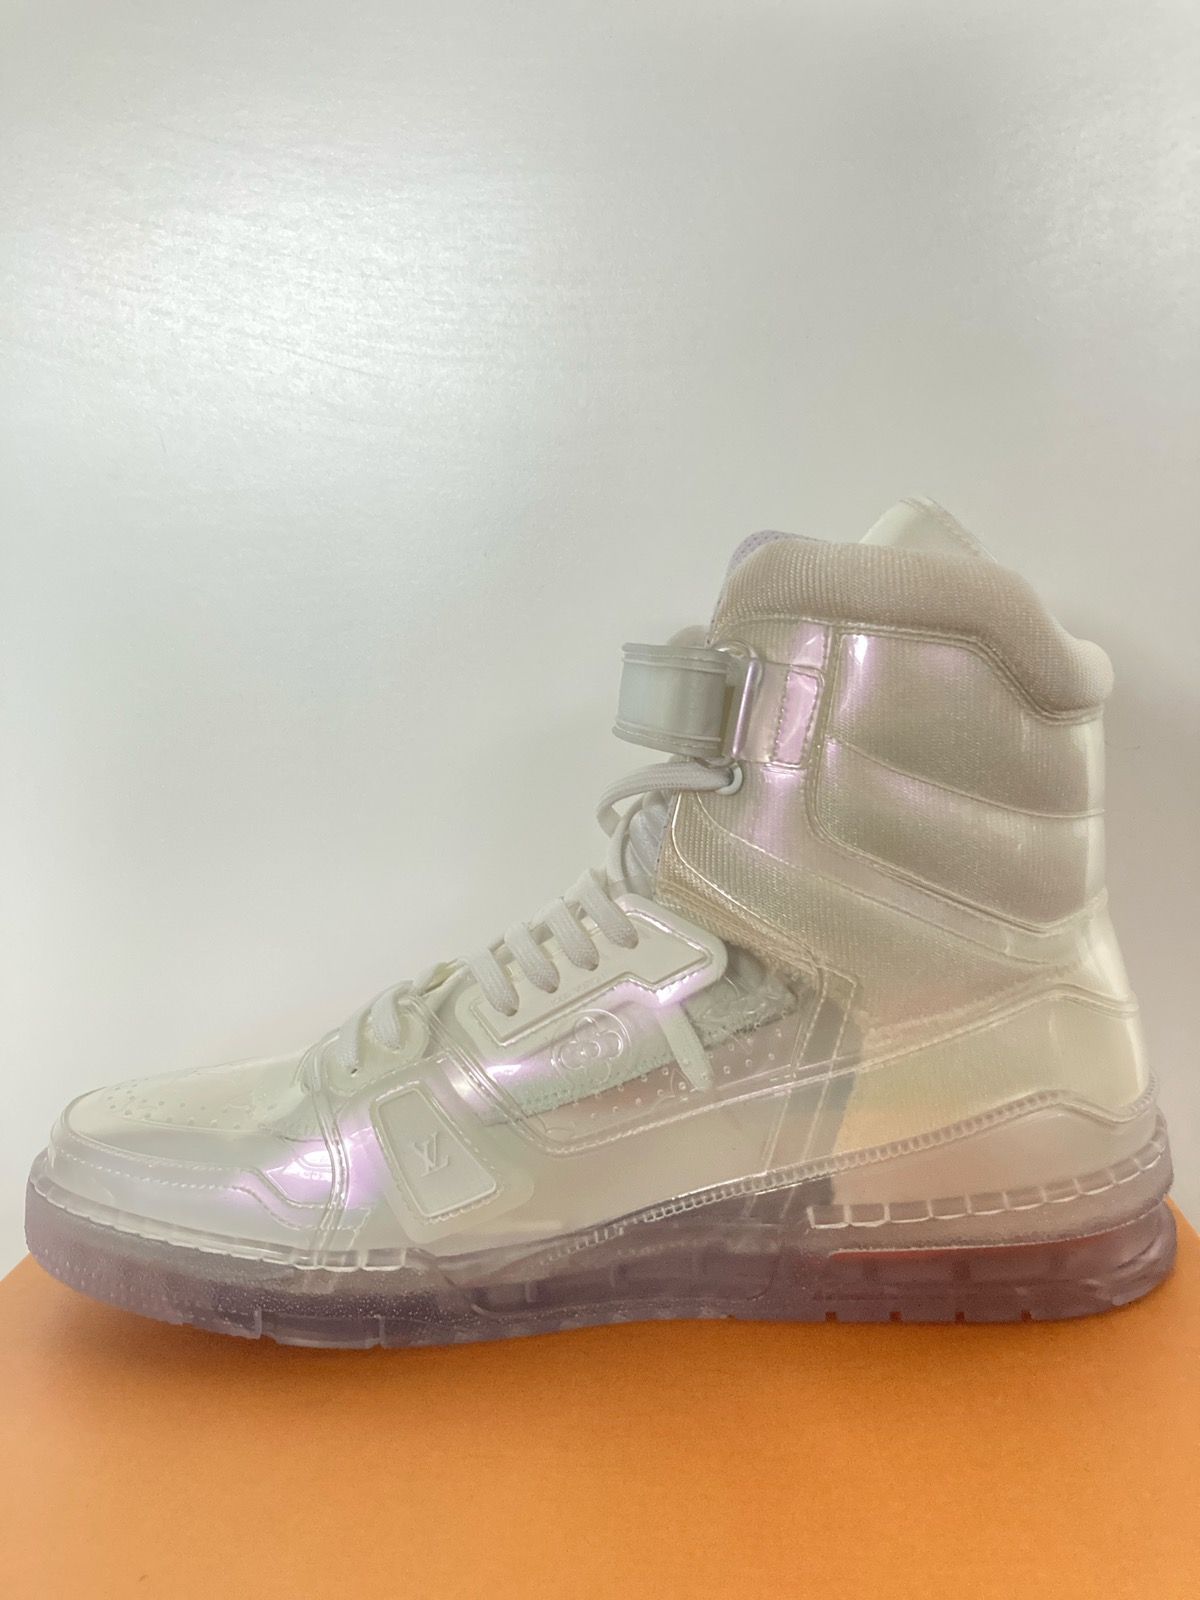 Take a look at the new Louis Vuitton 408/508 hightop sneakers